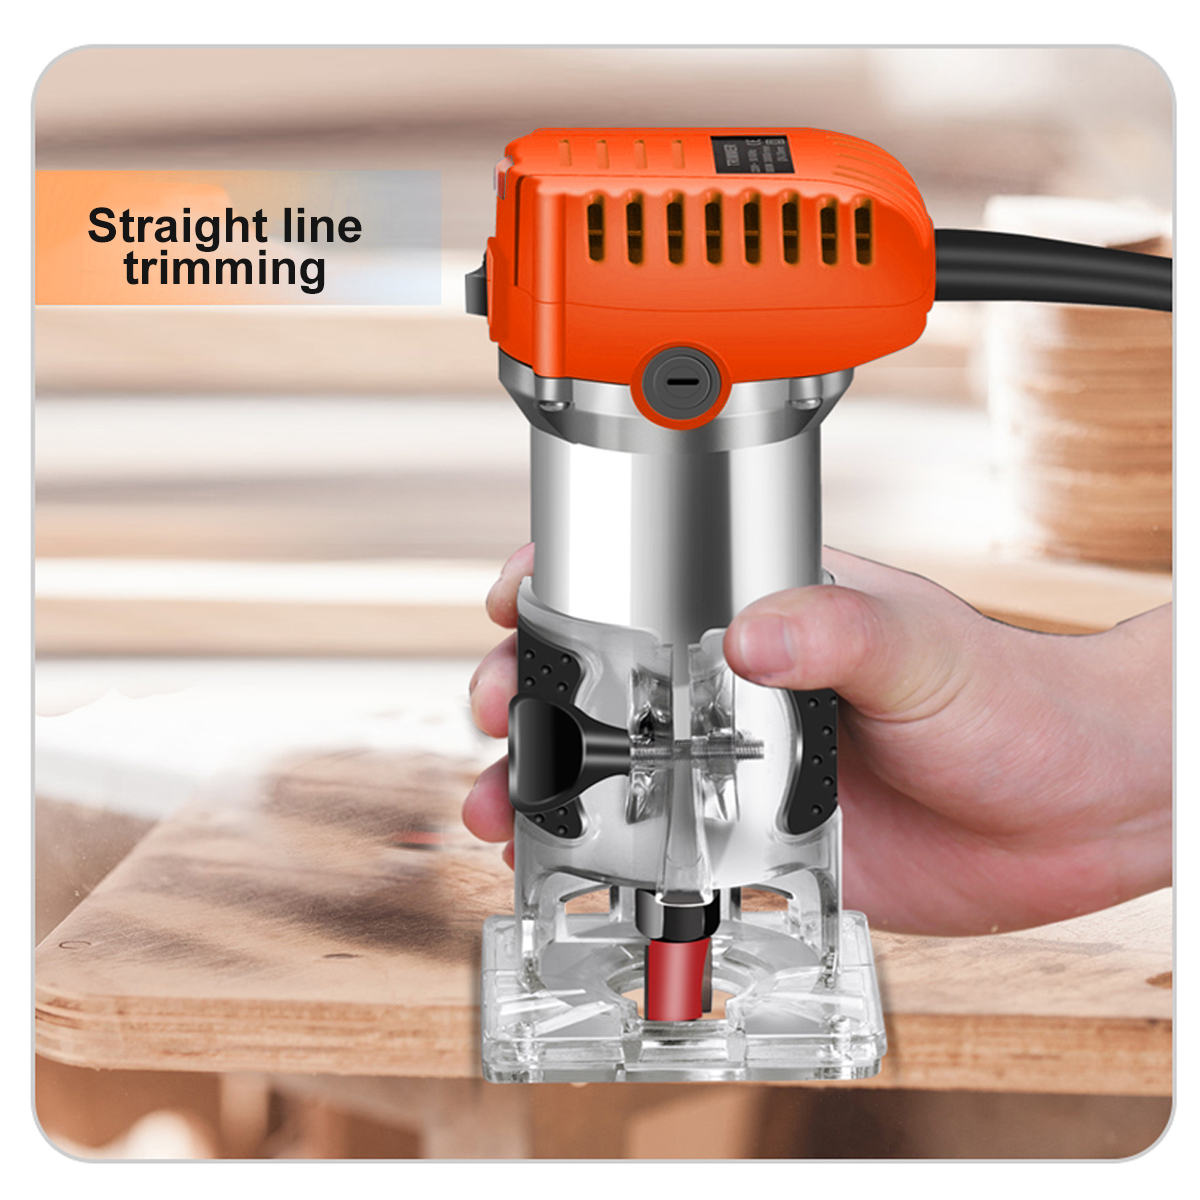 1280W-Wood-Palm-Router-Tool-Hand-Edge-Trimmer-WoodWorking-Joiner-Cutting-Palmming-Tool-6-Speeds-3500-1937521-11